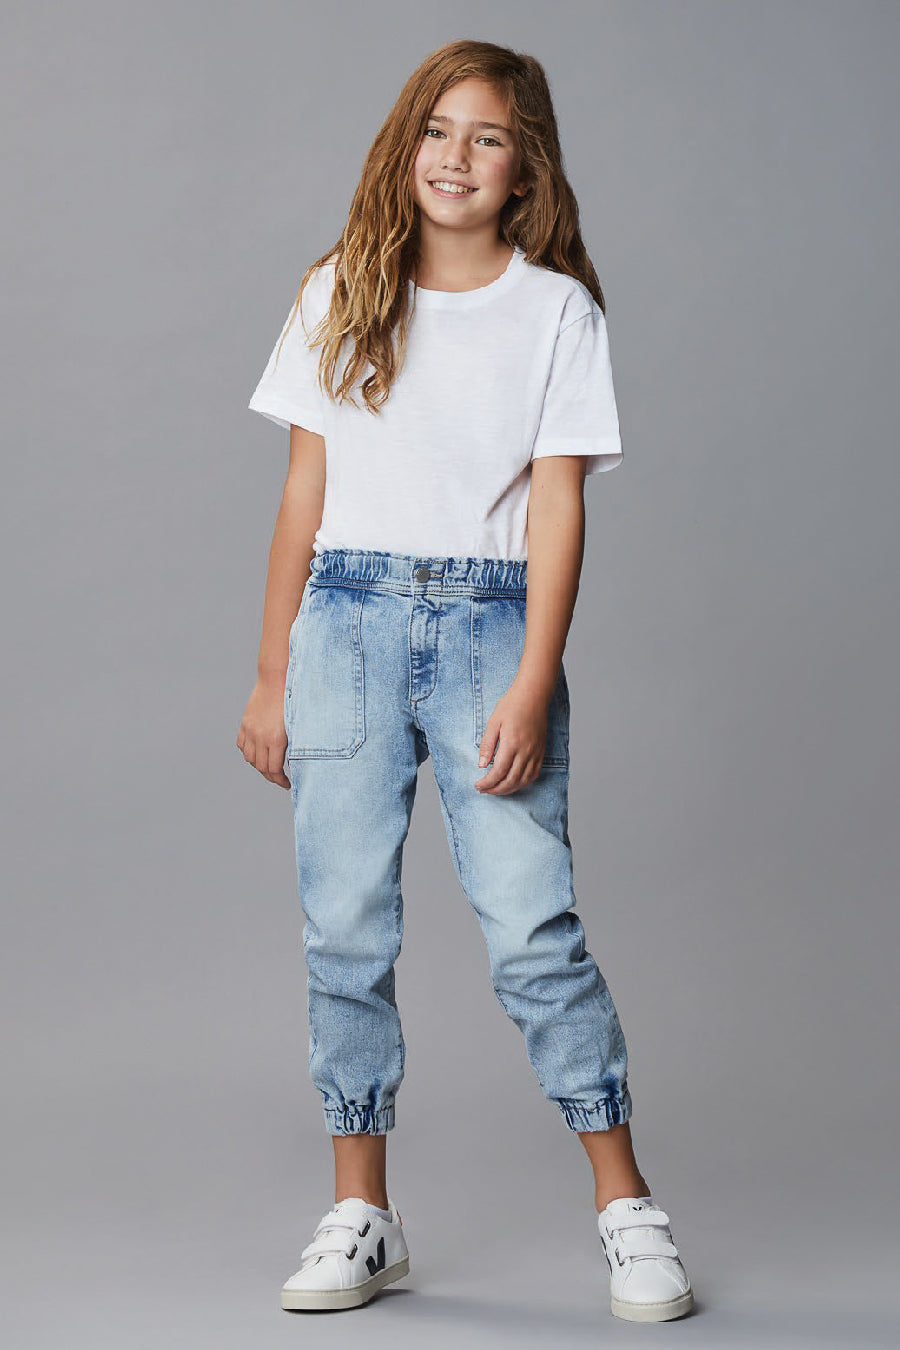 Baby Girls Denim Jeans Stretch Kids Wide Leg Pants Children Outwear  Trousers for Teenager Girl Spring Autumn